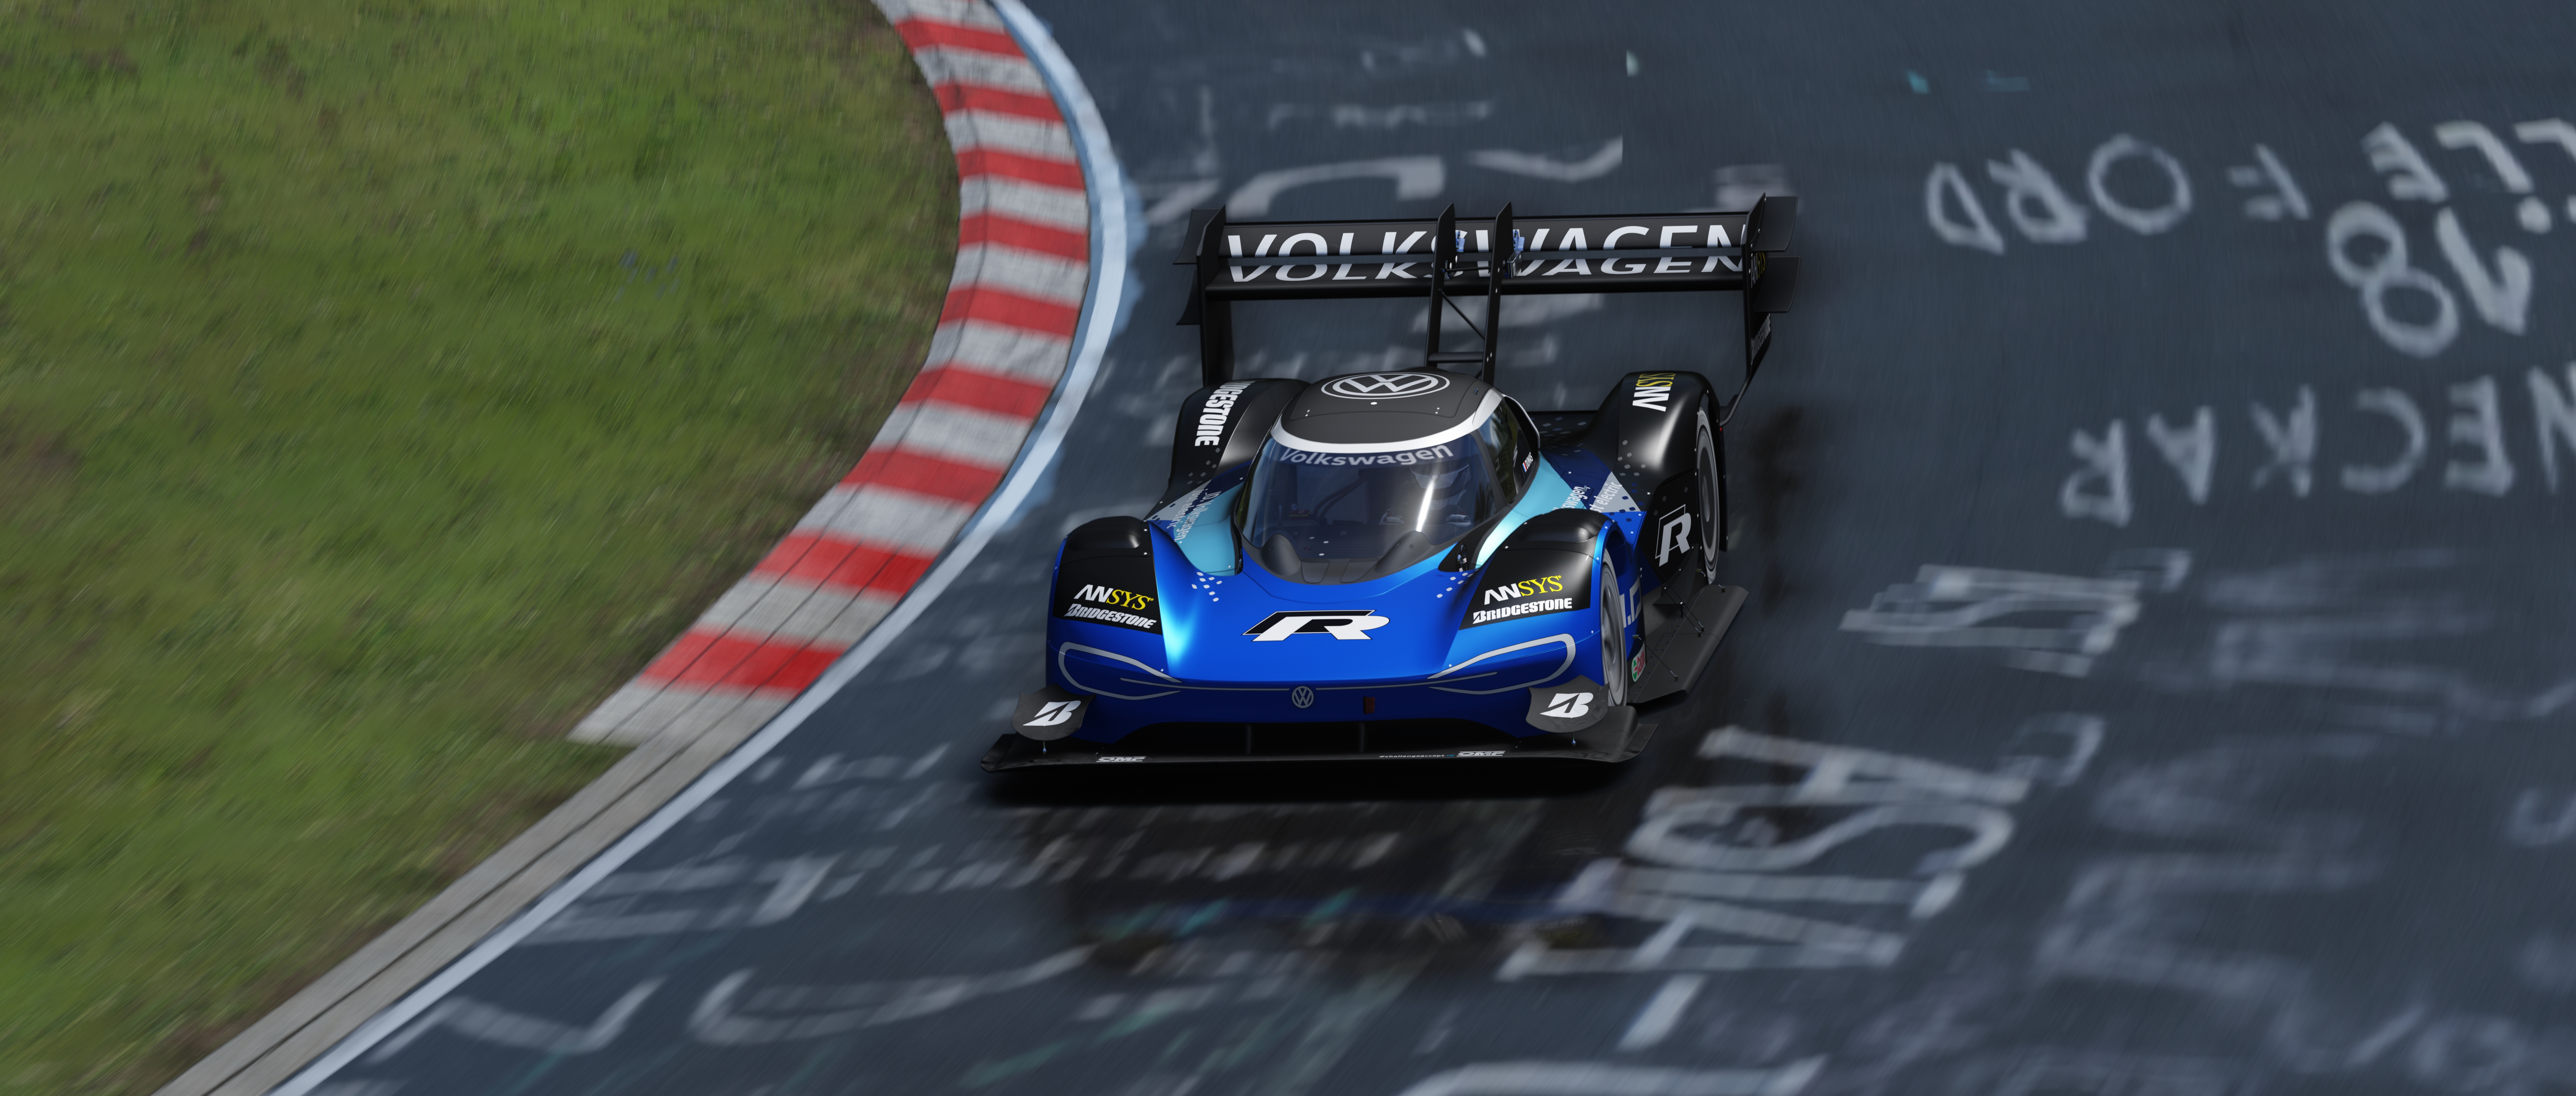 Volkswagen Volkswagen ID R Nurburgring Assetto Corsa Sunny After Rain Race Cars PC Gaming German Car 7680x3269